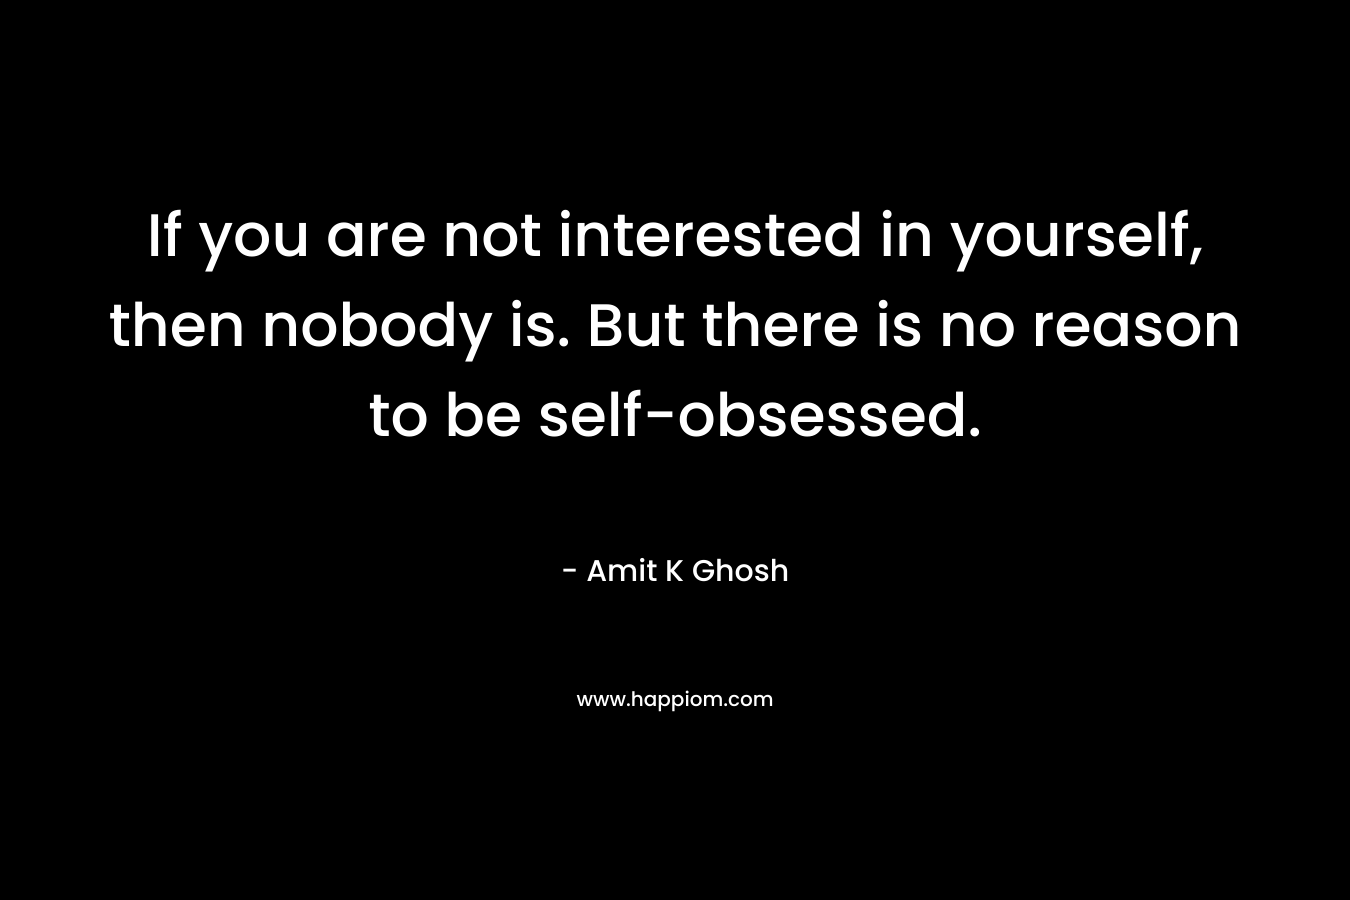 If you are not interested in yourself, then nobody is. But there is no reason to be self-obsessed.